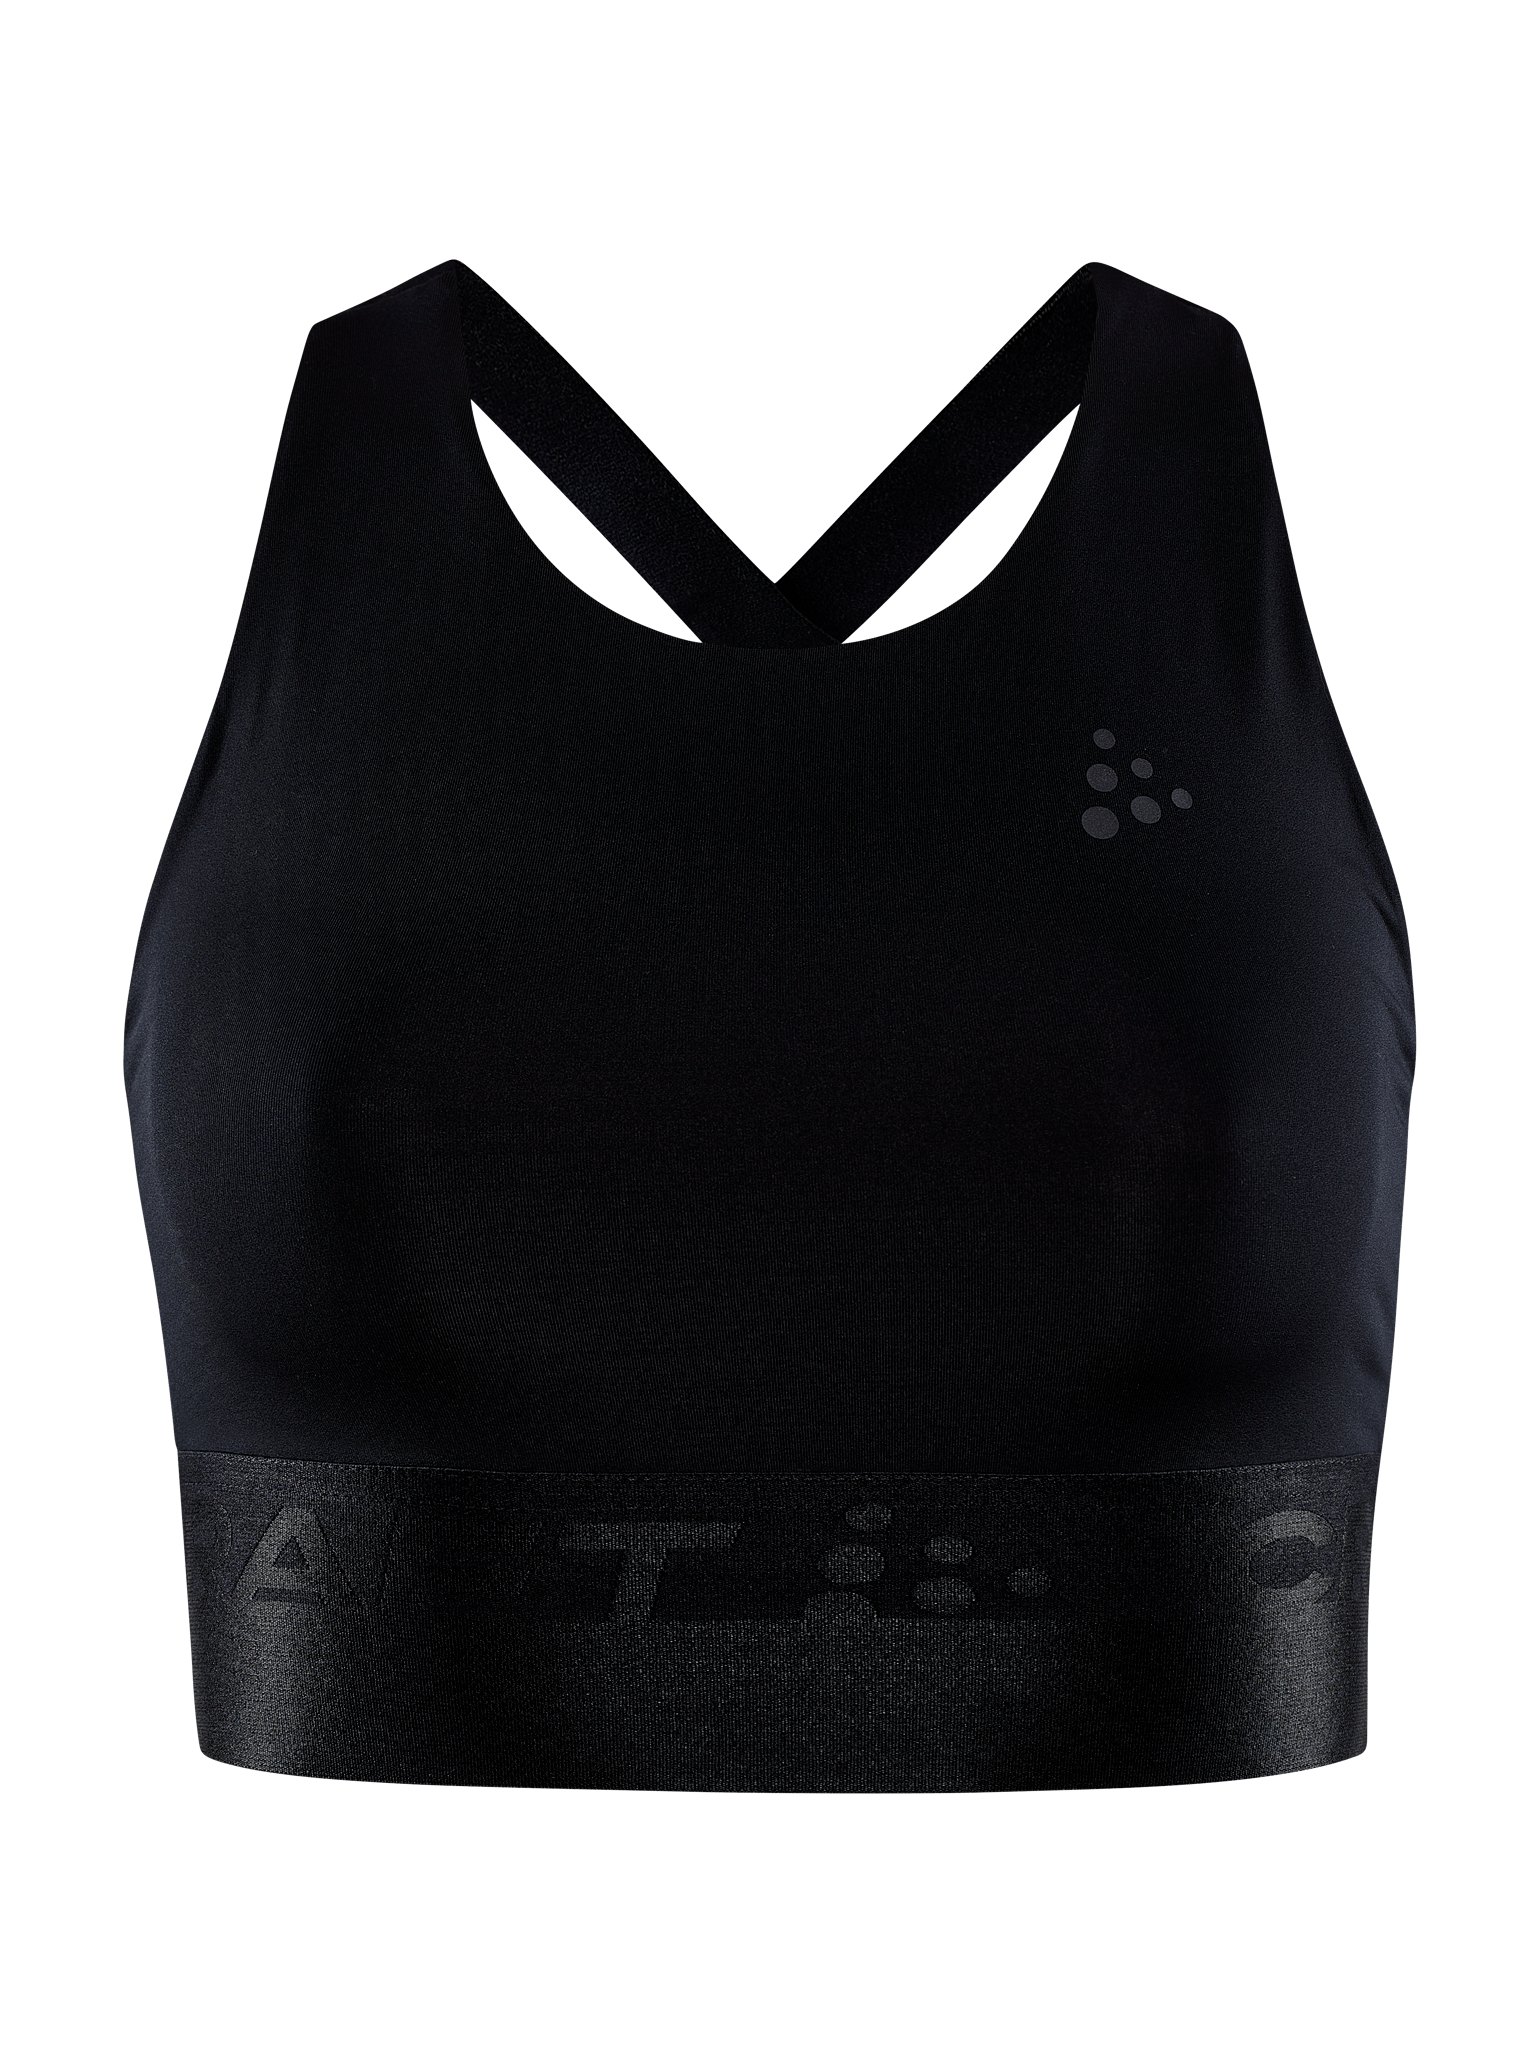 Craft Women's Core Charge Sport Top Black